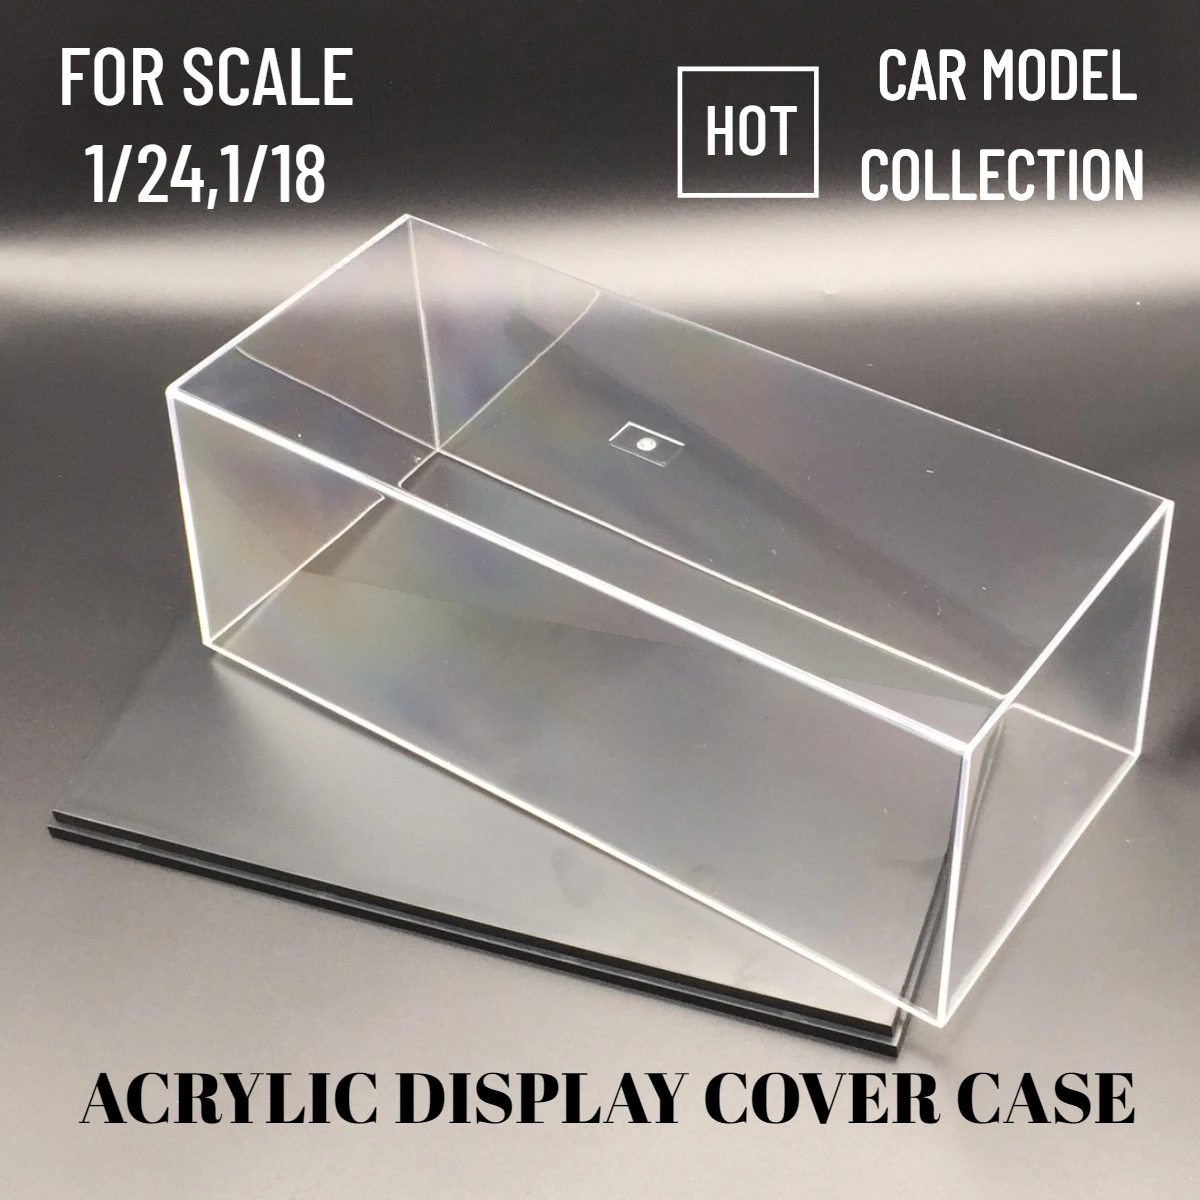 Scale 1:24 1:18 Car Model Display Case Transparent Acrylic Dust Proof Hard Cover PVC Box for Figure Collectible Miniature 1 43 scale display box model car acrylic case transparent dustproof with base high quality 14cm